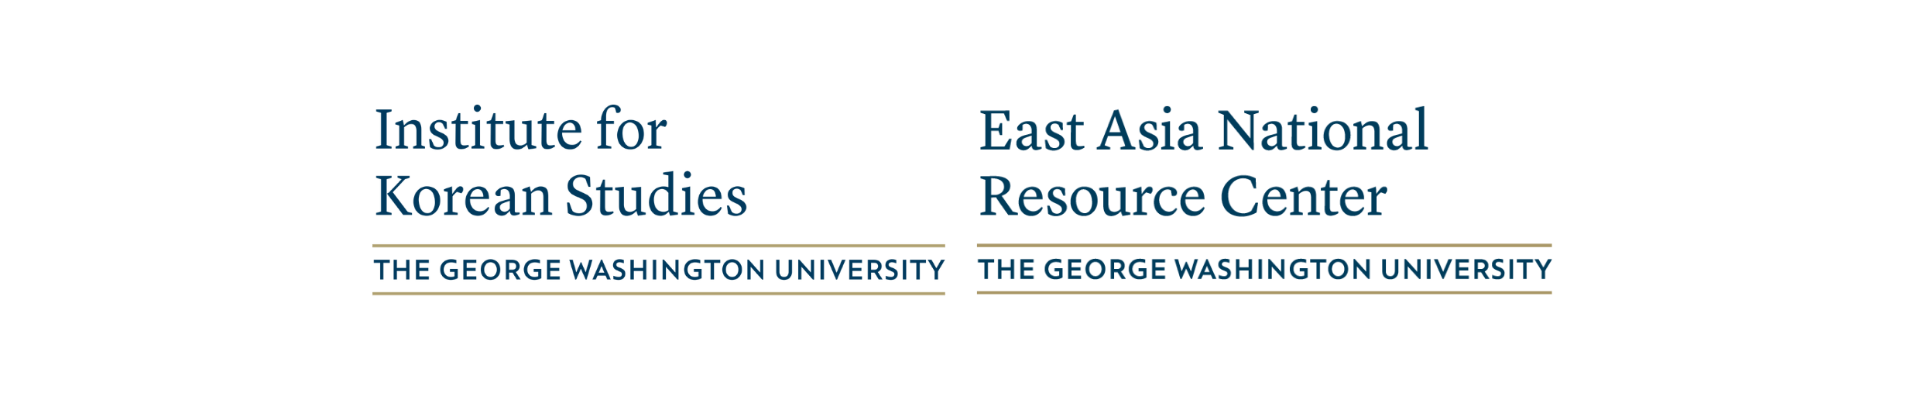 logos of the GW Institute for Korean Studies and East Asia National Resource Center